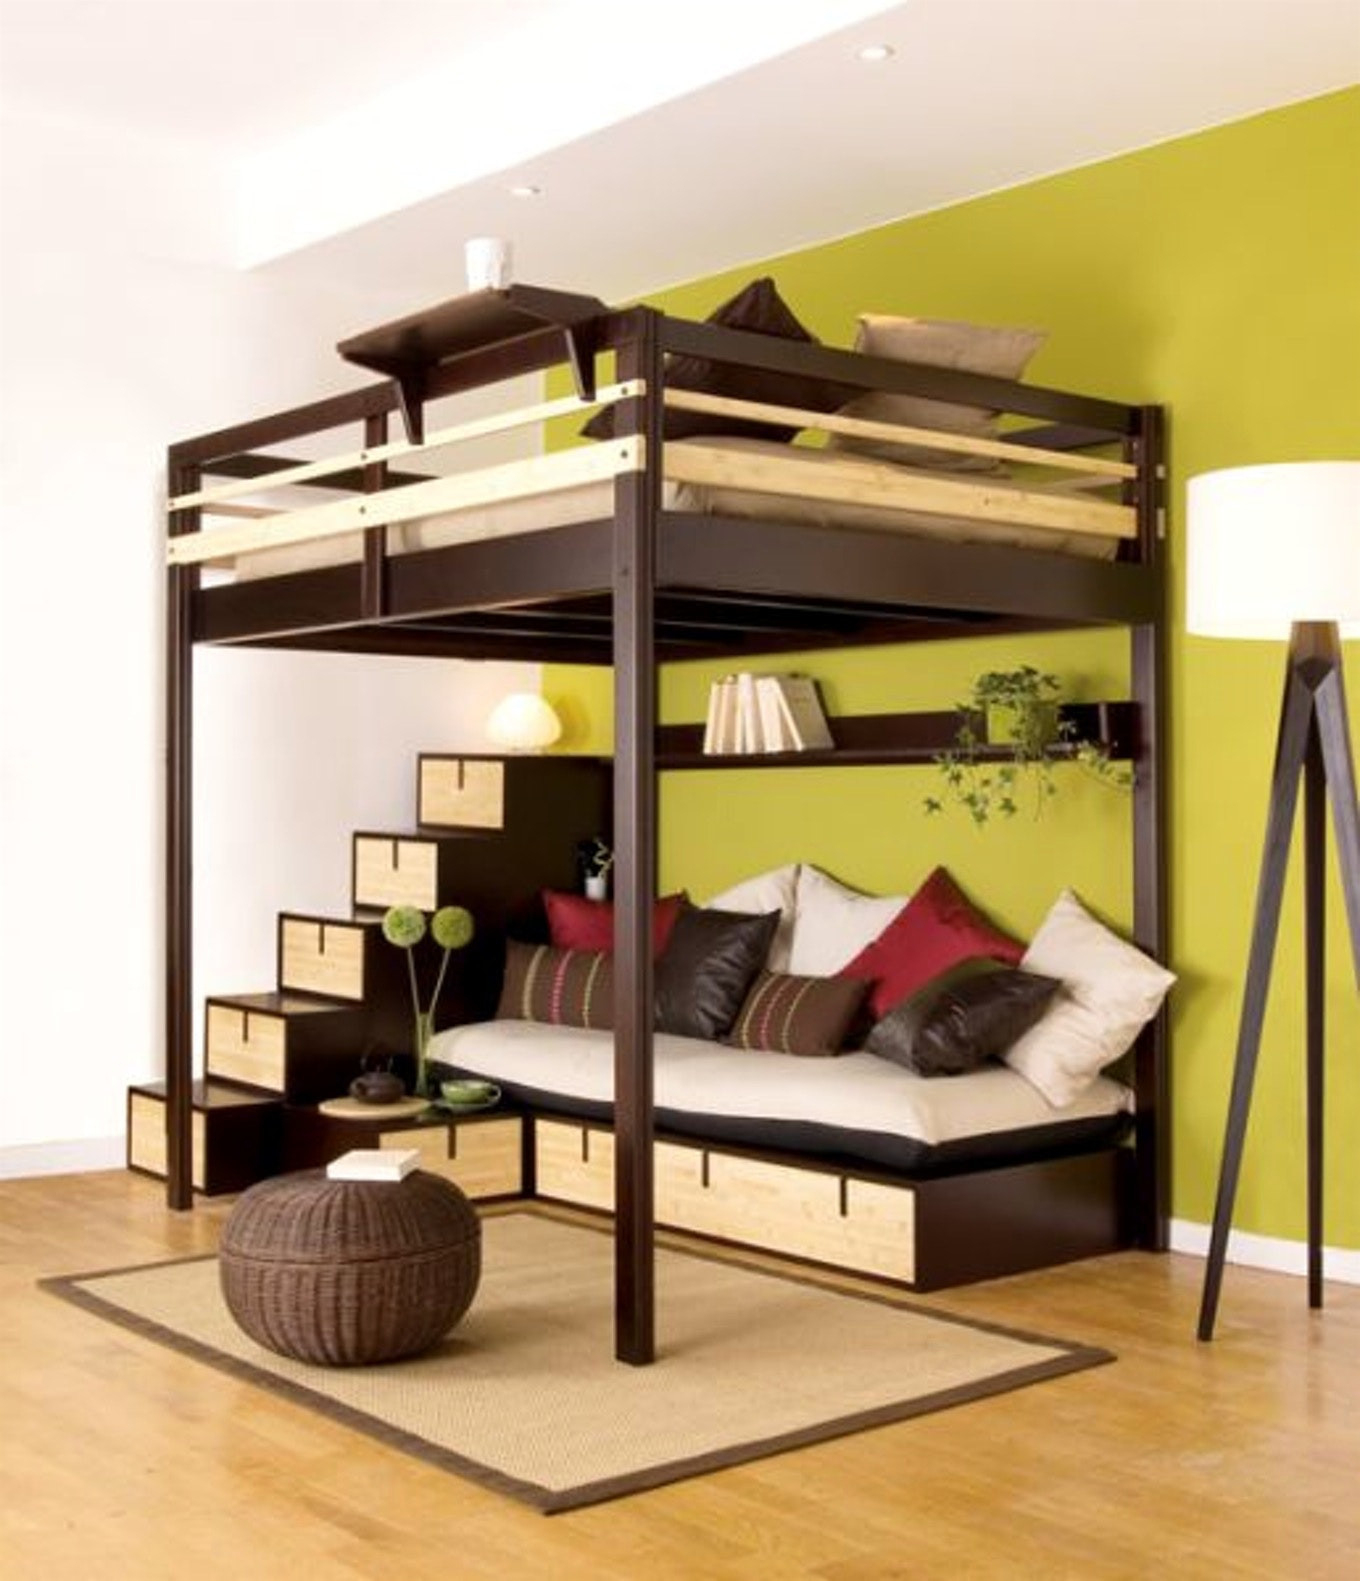 step 2 loft and storage twin bed